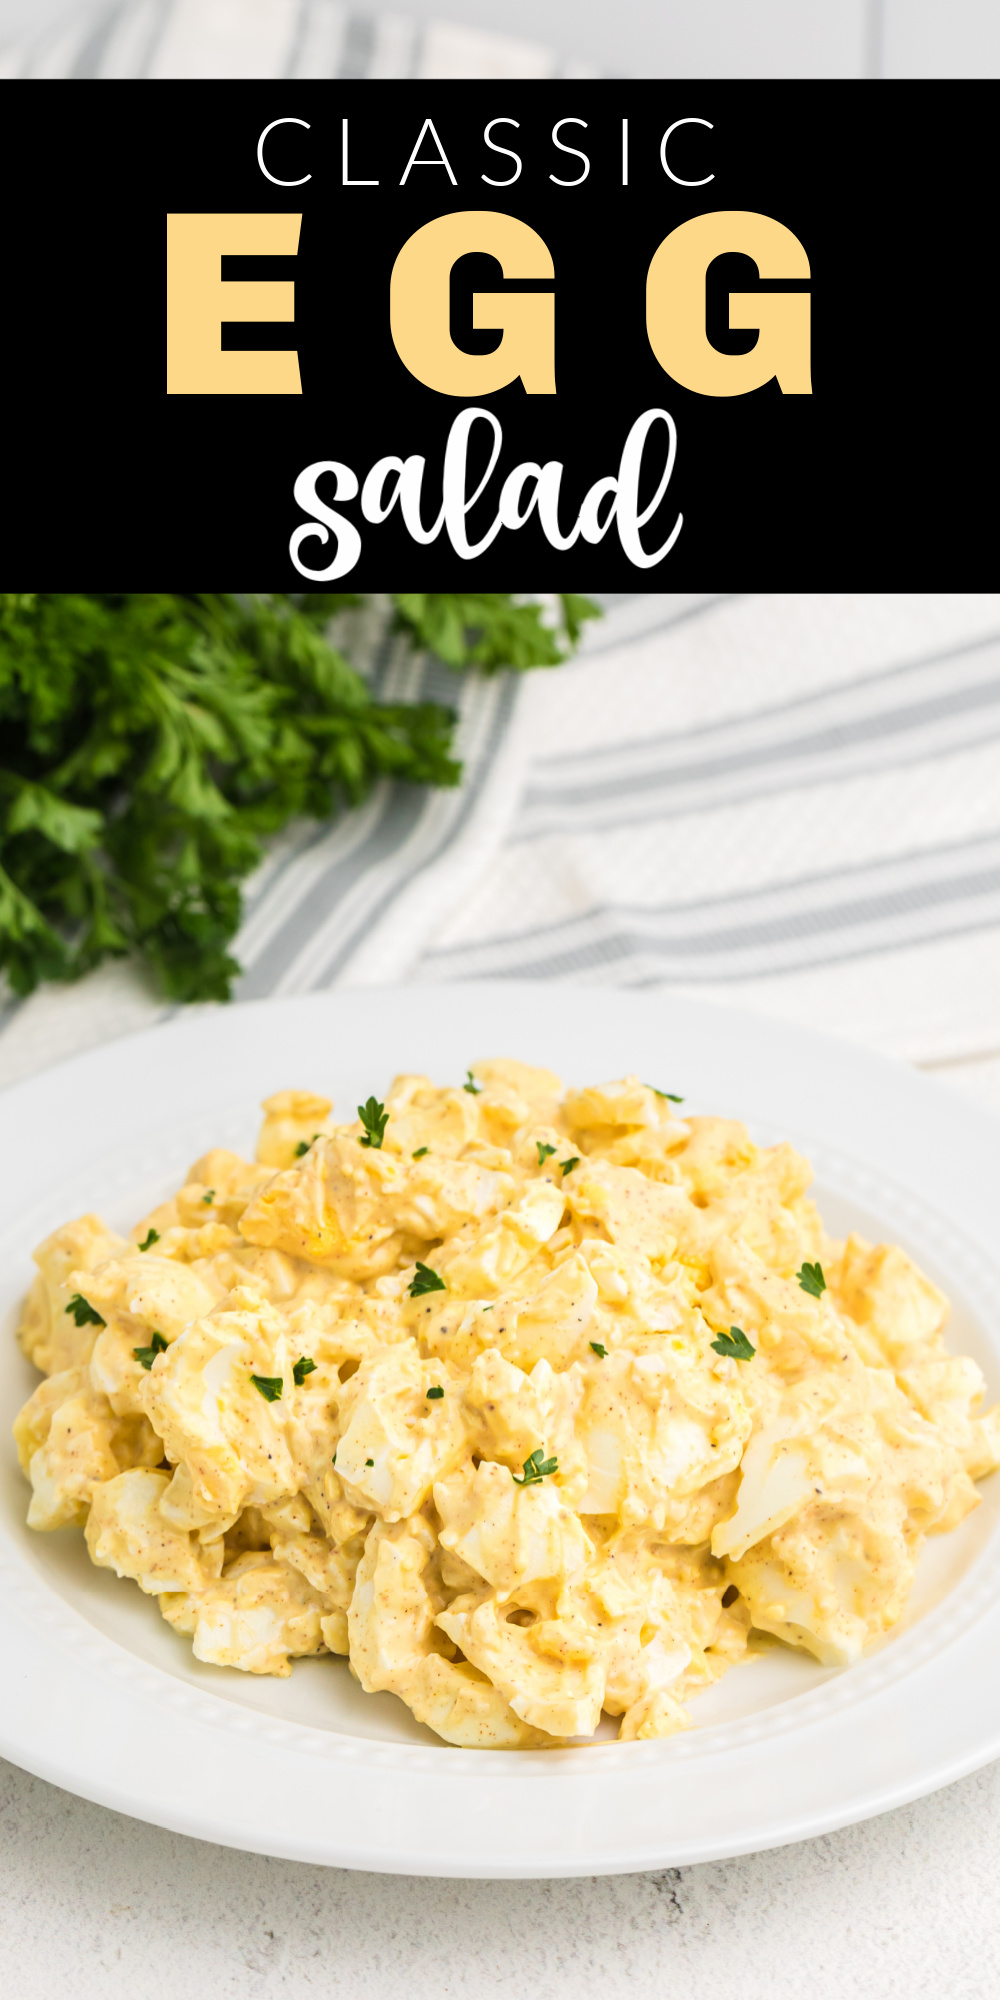 This easy egg salad recipe is literally the EASIEST egg salad ever. Made with hard boiled eggs, dijon mustard, seasonings, and more. It's a delicious, light lunch recipe that makes the best egg salad sandwiches.